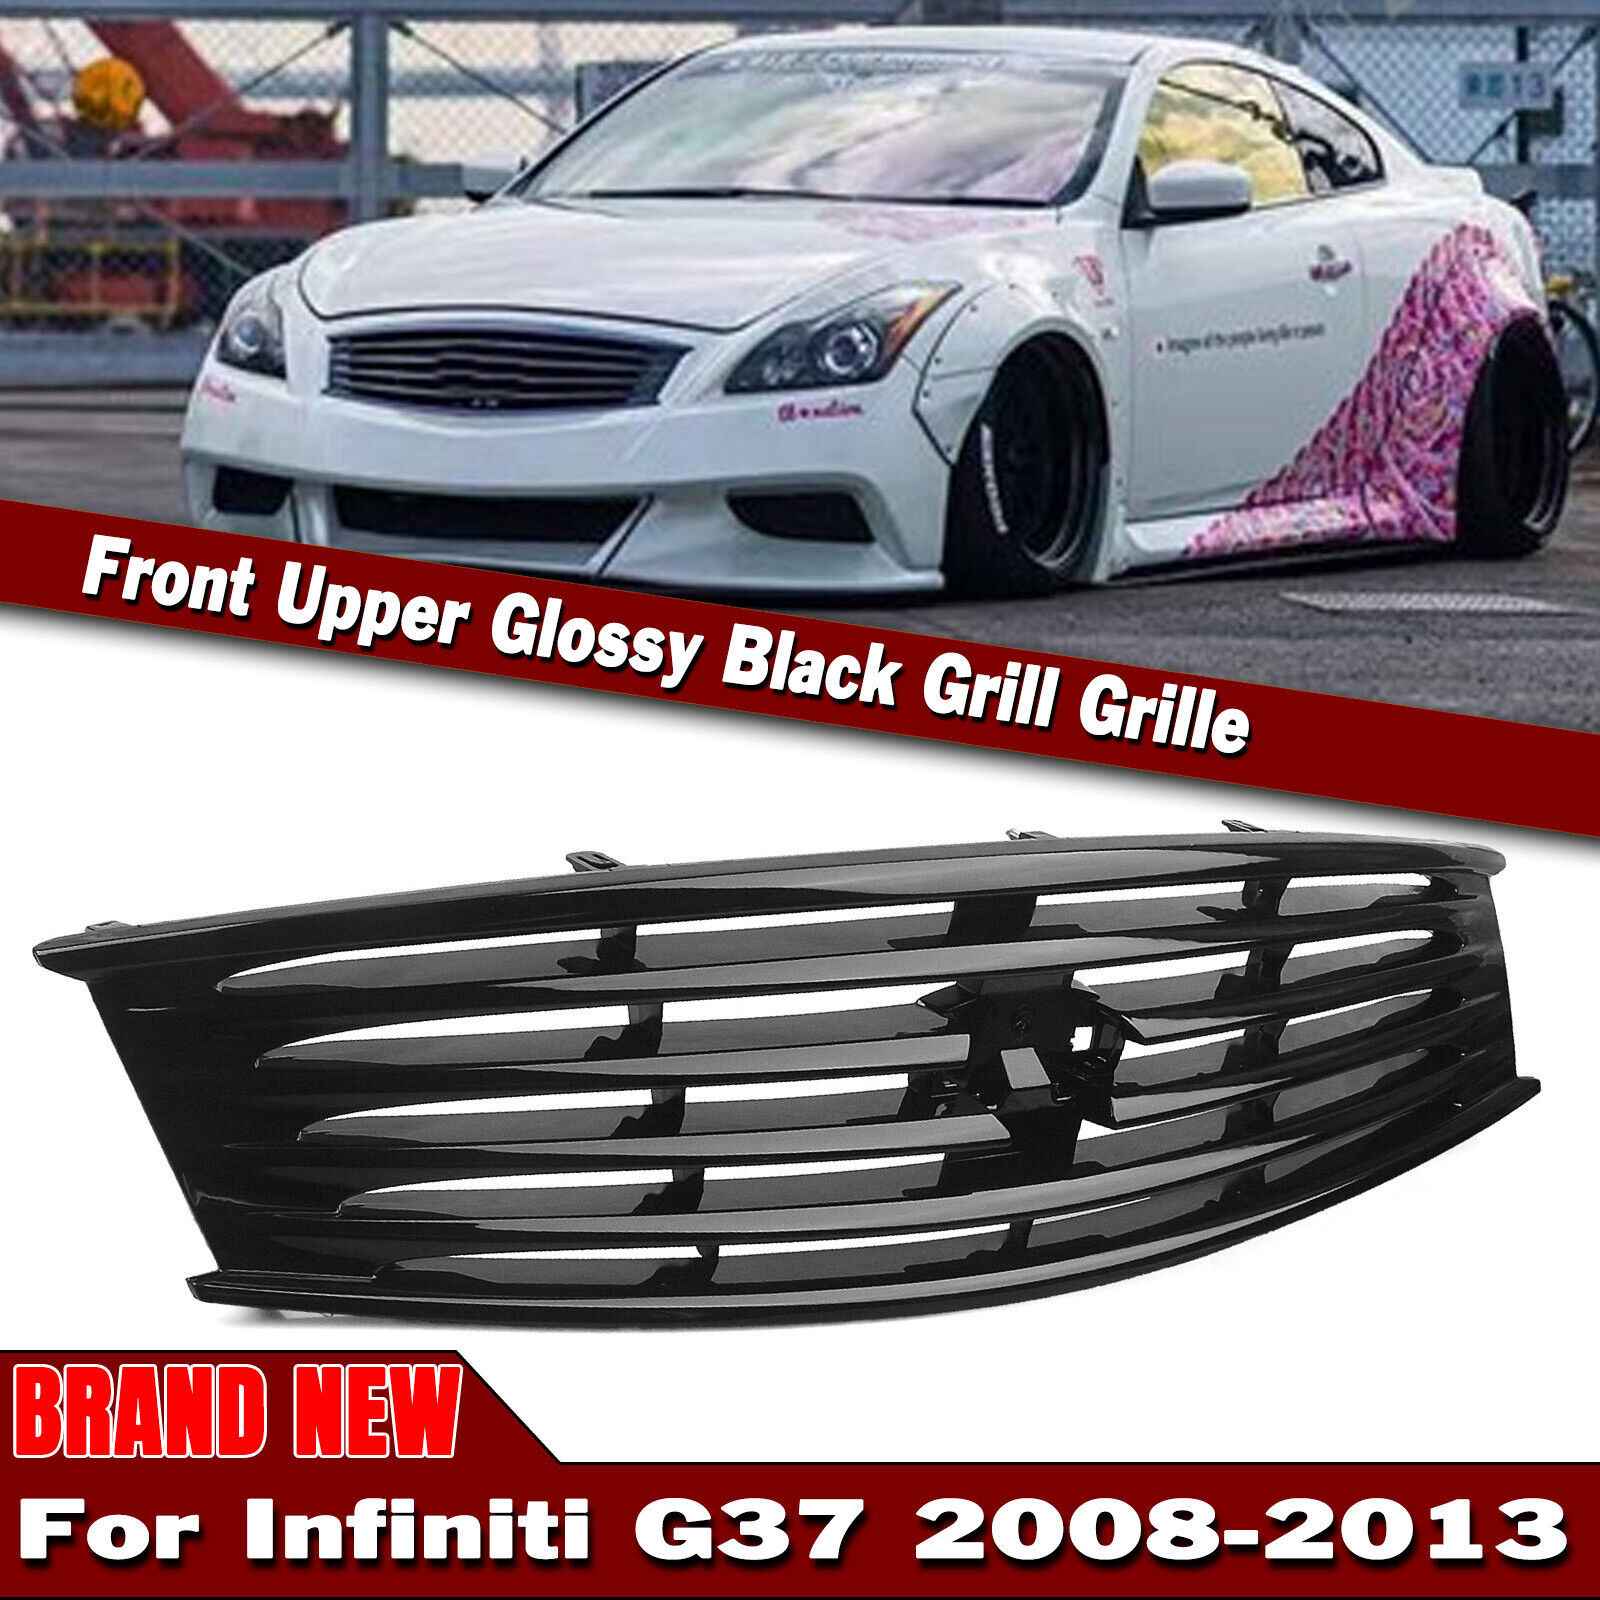 Front Grill Grille For Infiniti G37 2 Door Coupe 2008-2013 2011 2012 Gloss Black